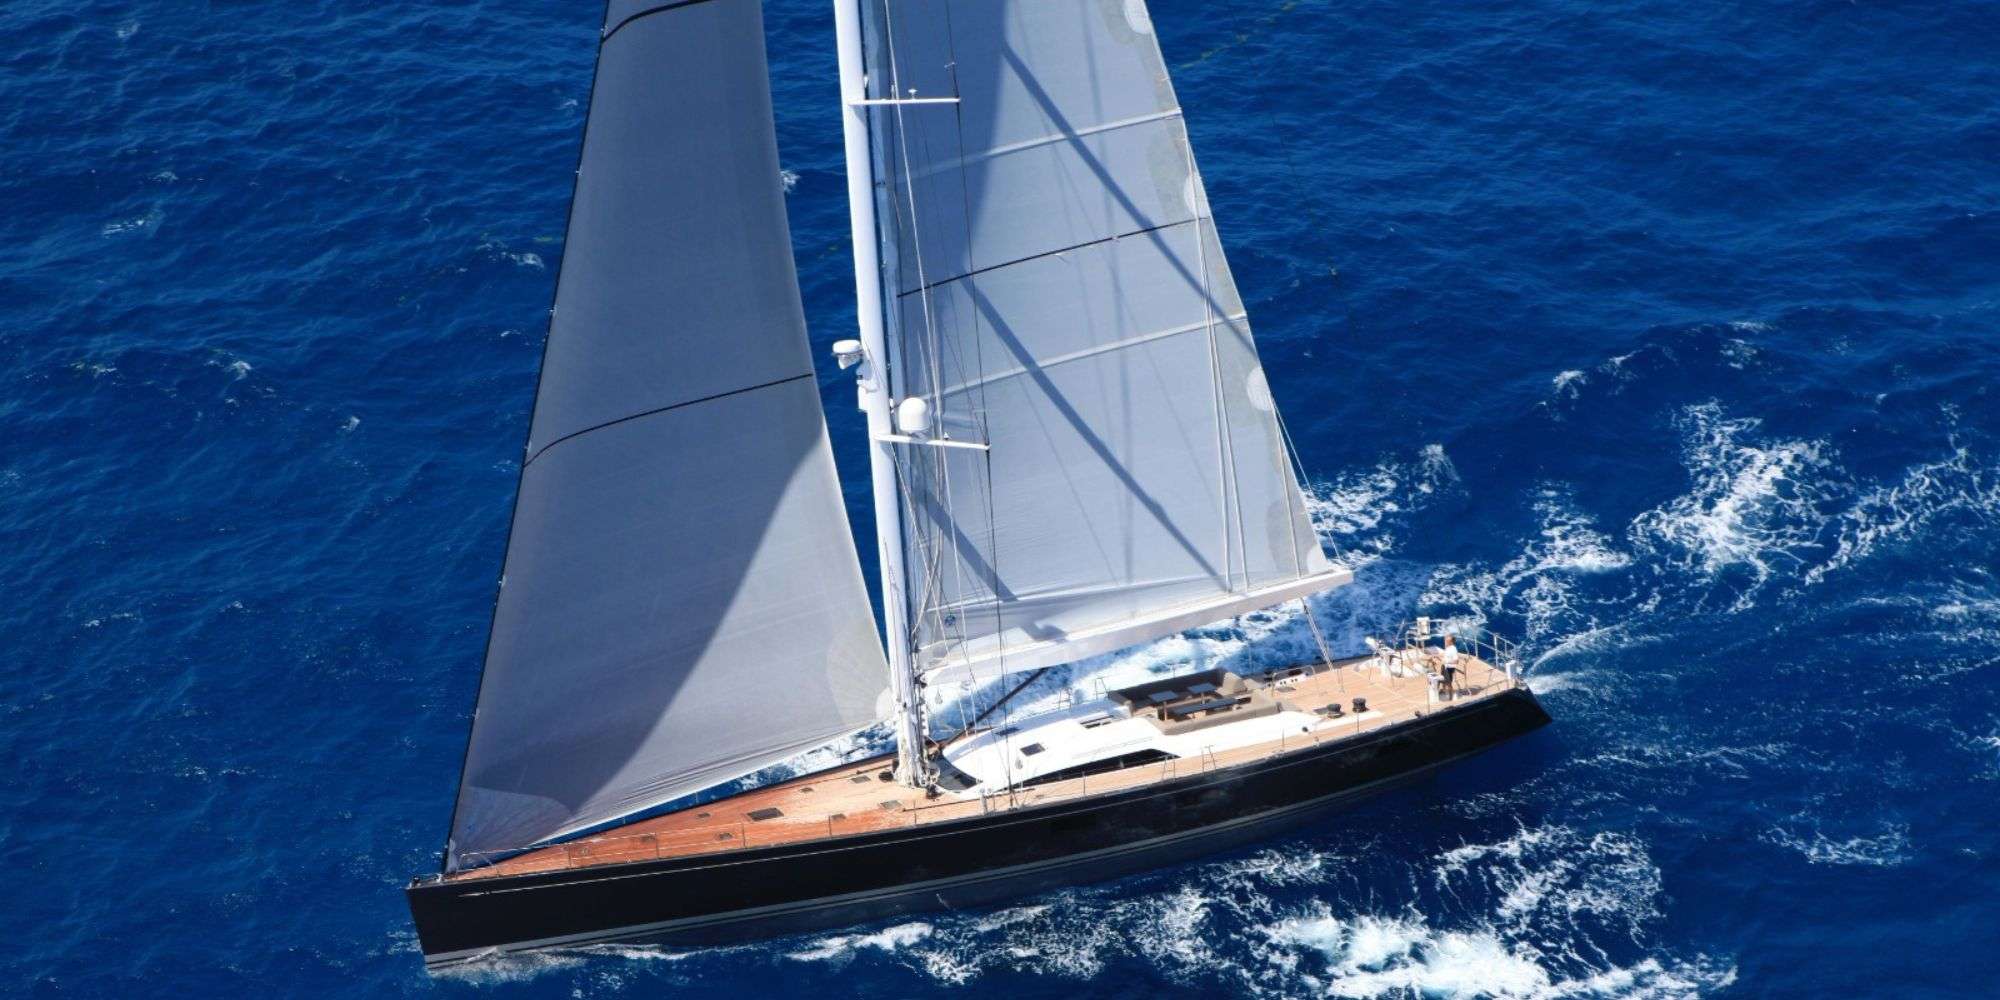 YCH2 - Yacht Charter Lavagna & Boat hire in W. Med -Naples/Sicily, Greece, W. Med -Riviera/Cors/Sard., Turkey, Croatia | Winter: Caribbean Virgin Islands (US/BVI), Caribbean Leewards, Caribbean Windwards 1